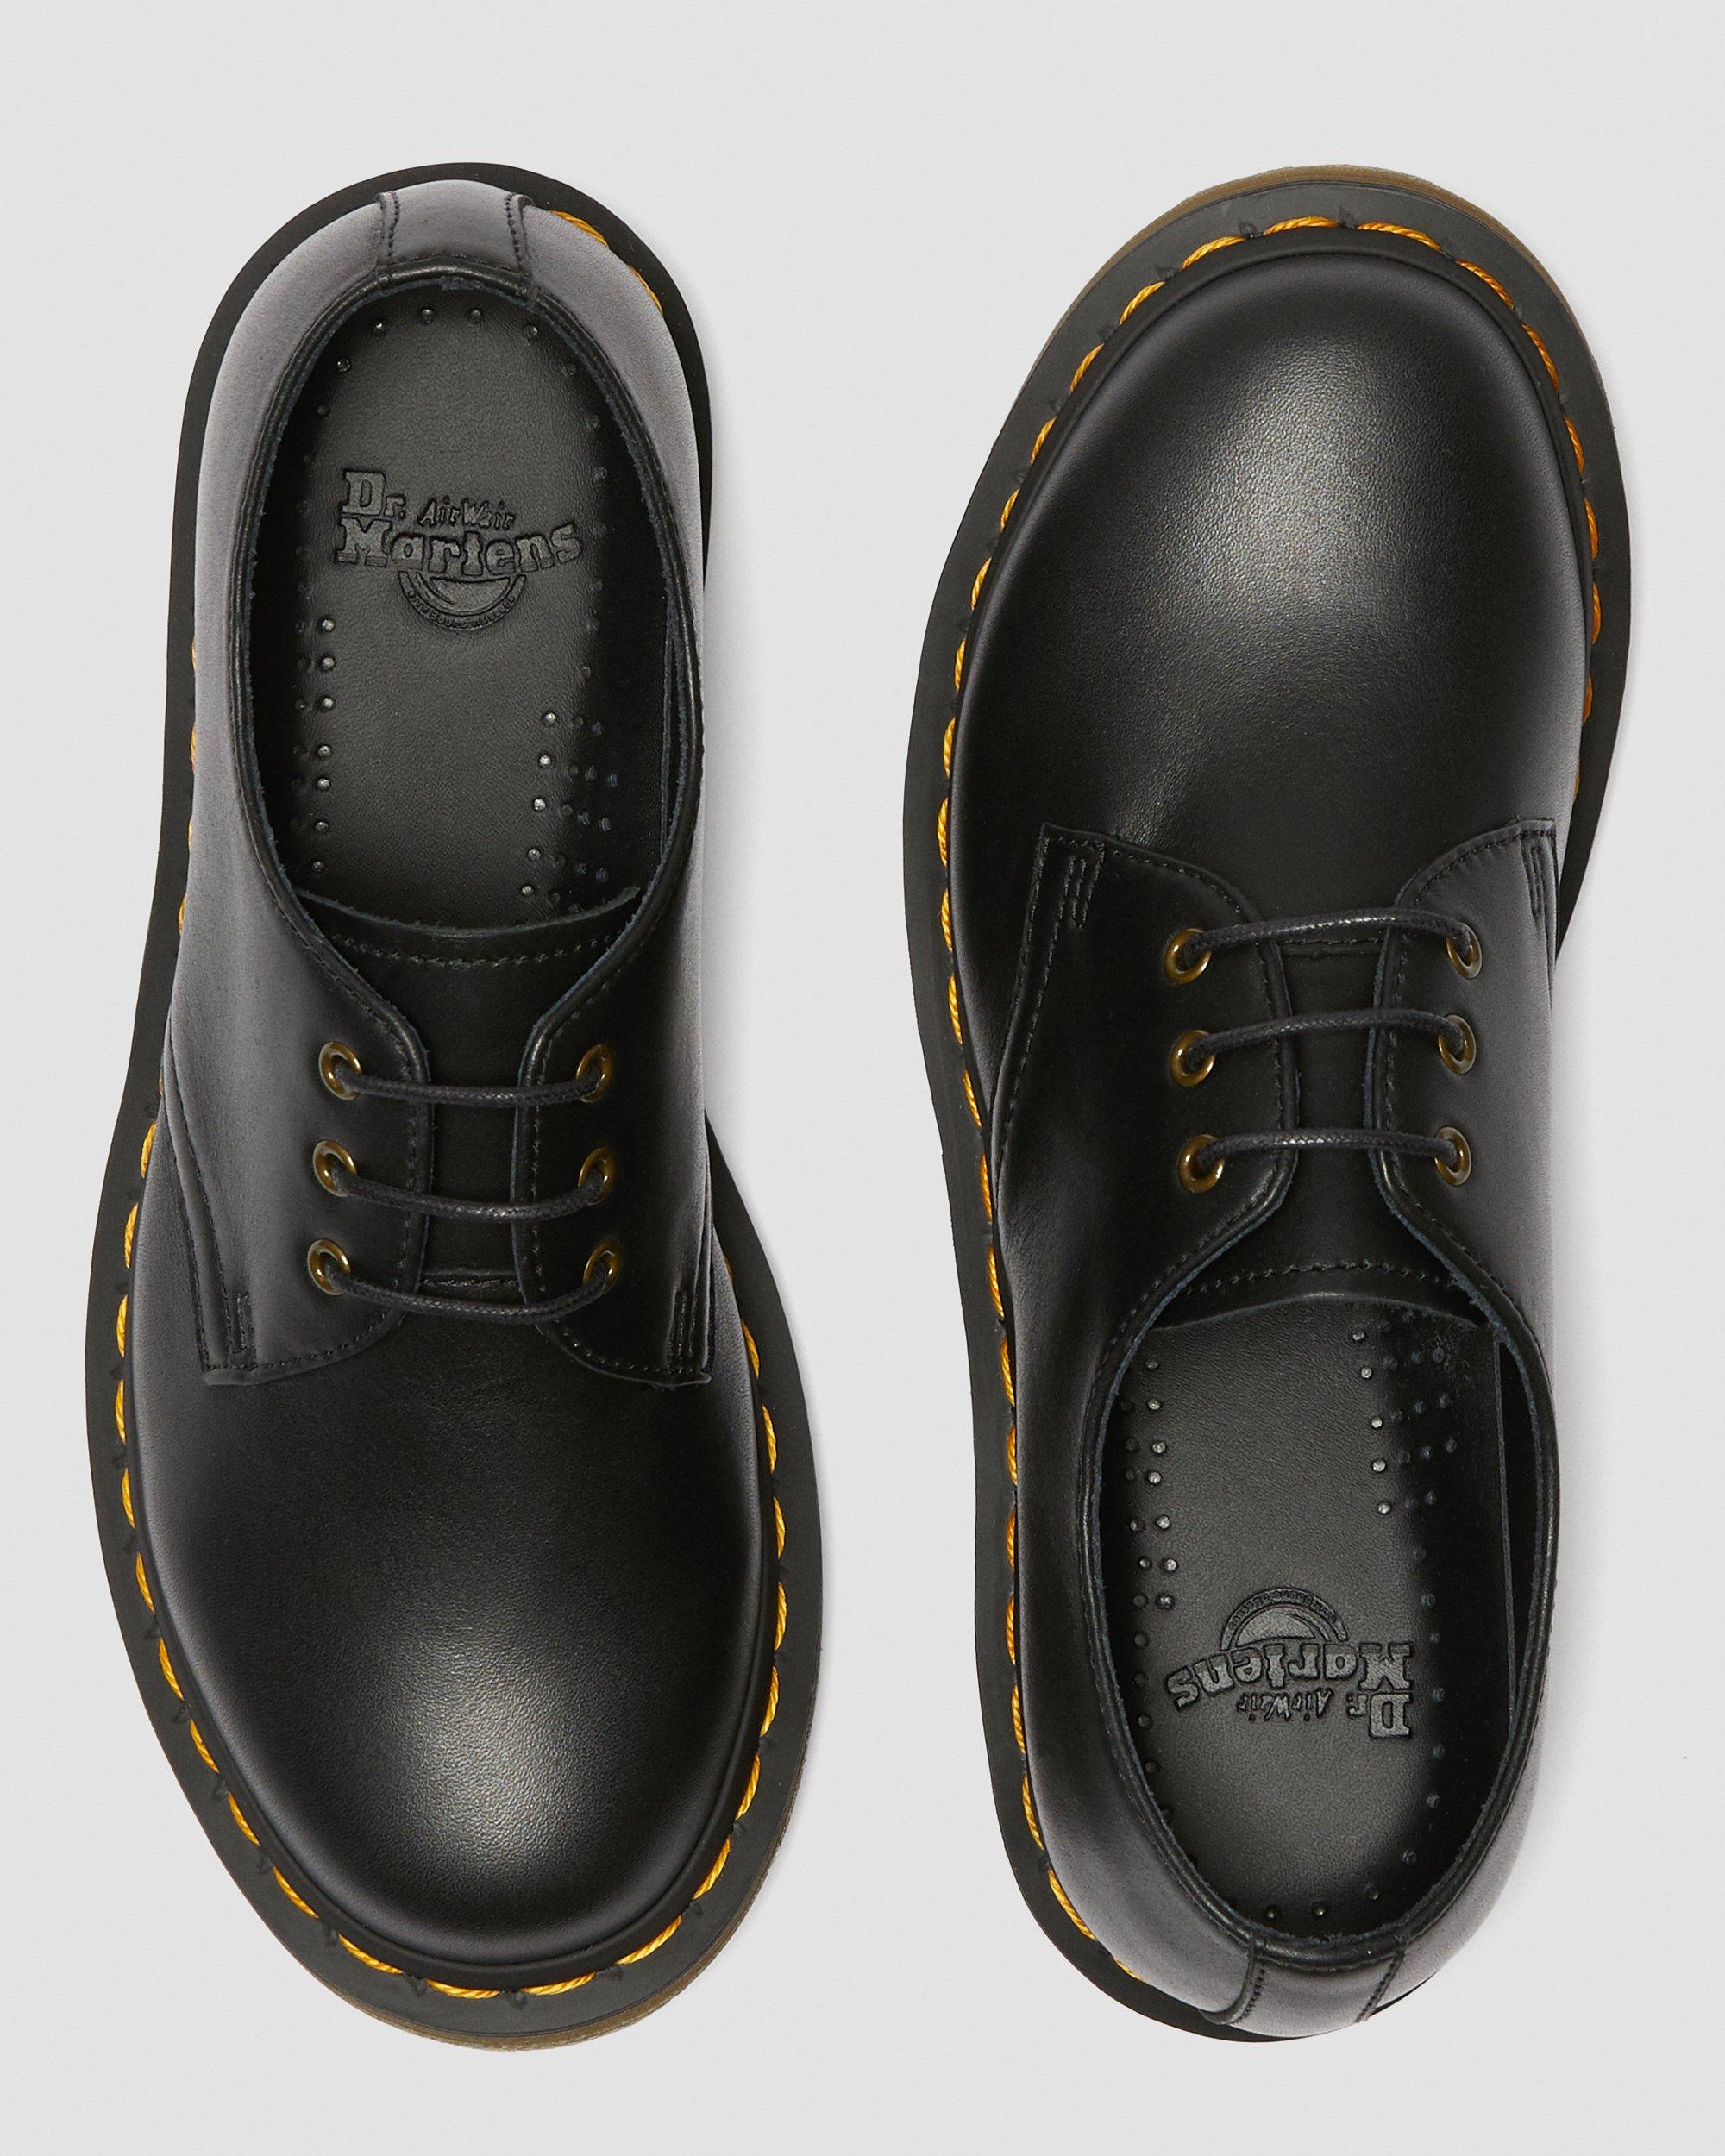 1461 WOMEN'S WANAMA LEATHER OXFORD SHOES | Dr. Martens Official